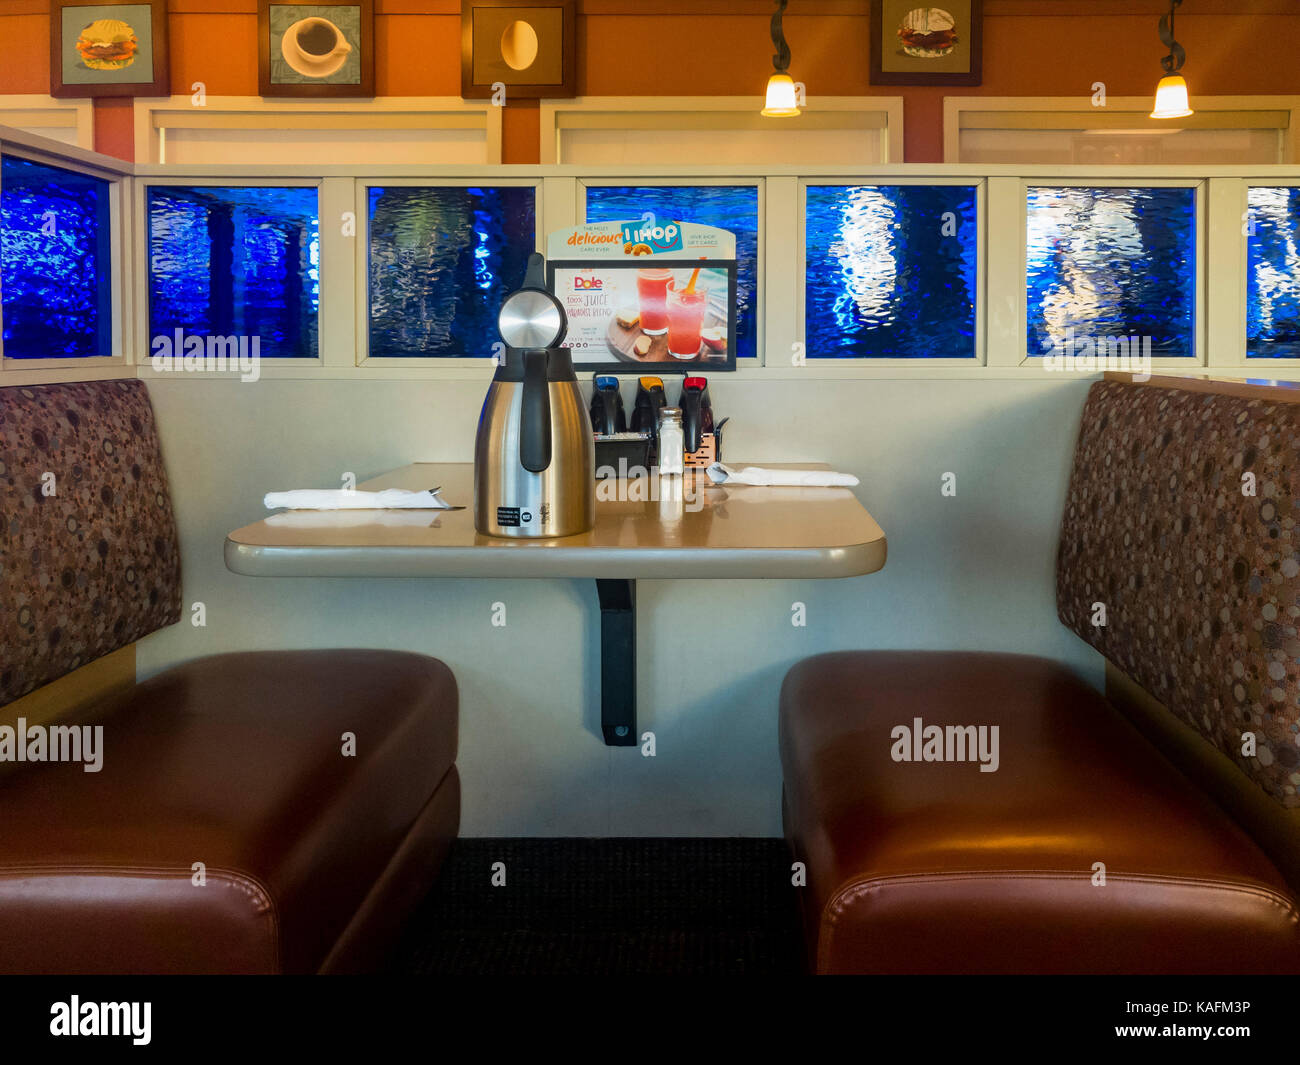 Los Angeles, SEP 23: Interior view of the famous chain restaurant - IHOP on SEP 23, 2017 at Los Angeles, California, United States Stock Photo